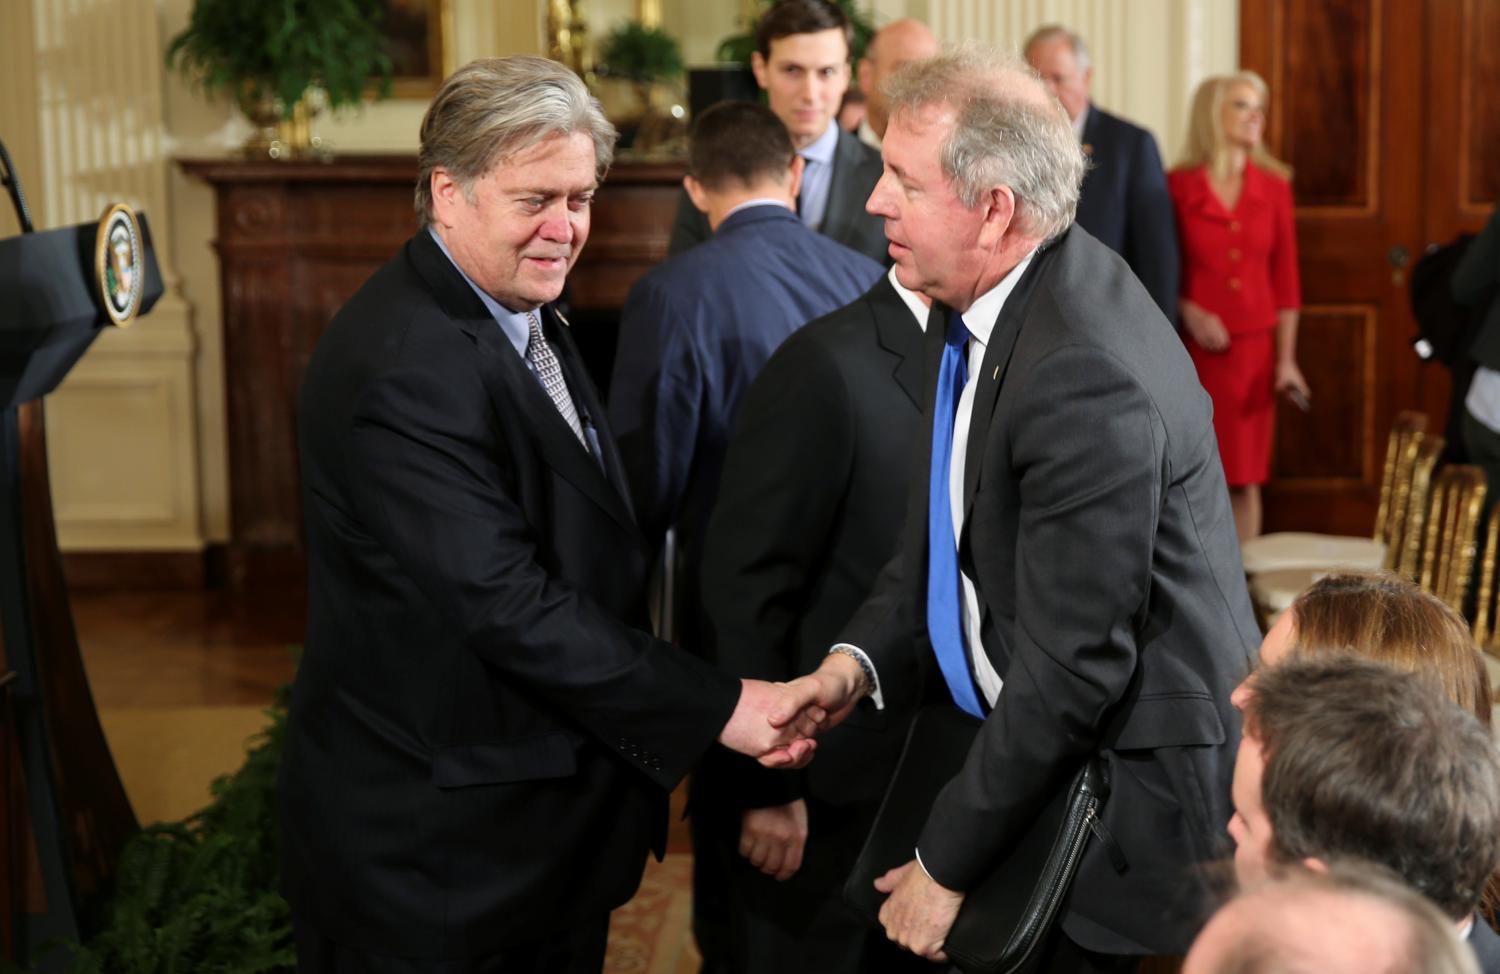 Then White House Chief Strategist Steve Bannon greets Britain's ambassador to the United States Kim Darroch prior to a joint news conference between U.S. President Donald Trump and British Prime Minister Theresa May at the White House in Washington, U.S., January 27, 2017.  Picture taken January 27, 2017. REUTERS/Carlos Barria - RC1965E5B780